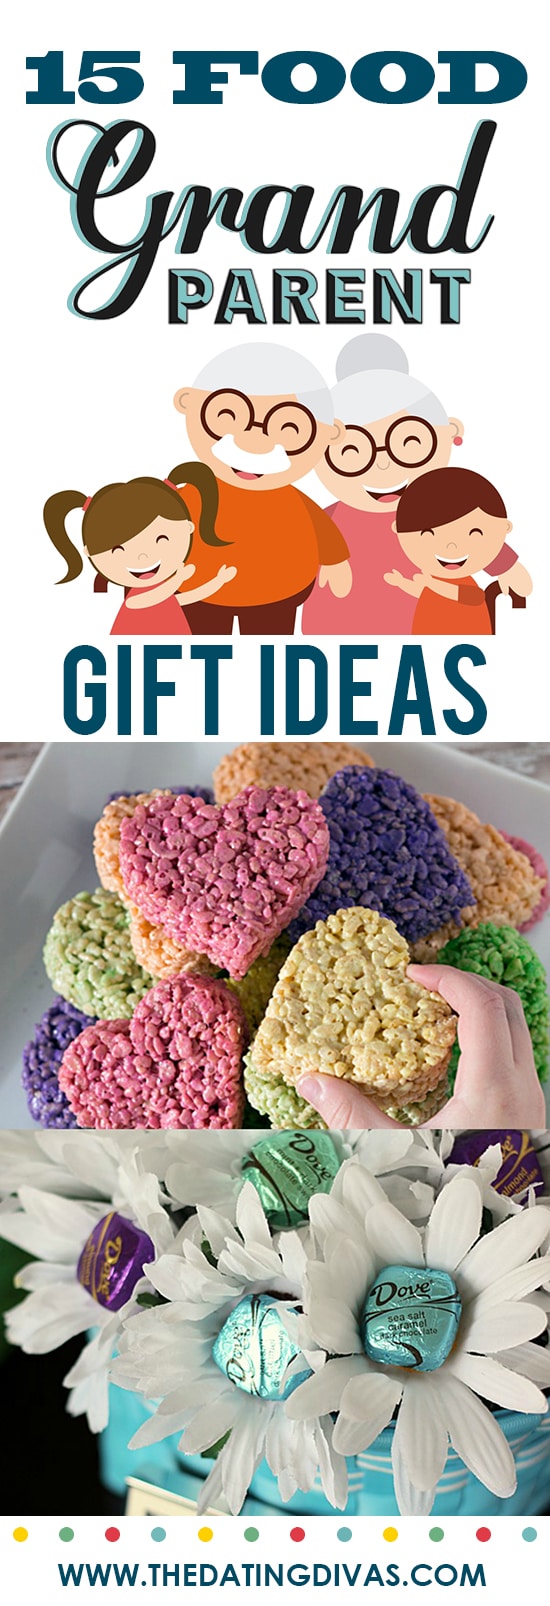 Food gift ideas for Grandparents Day